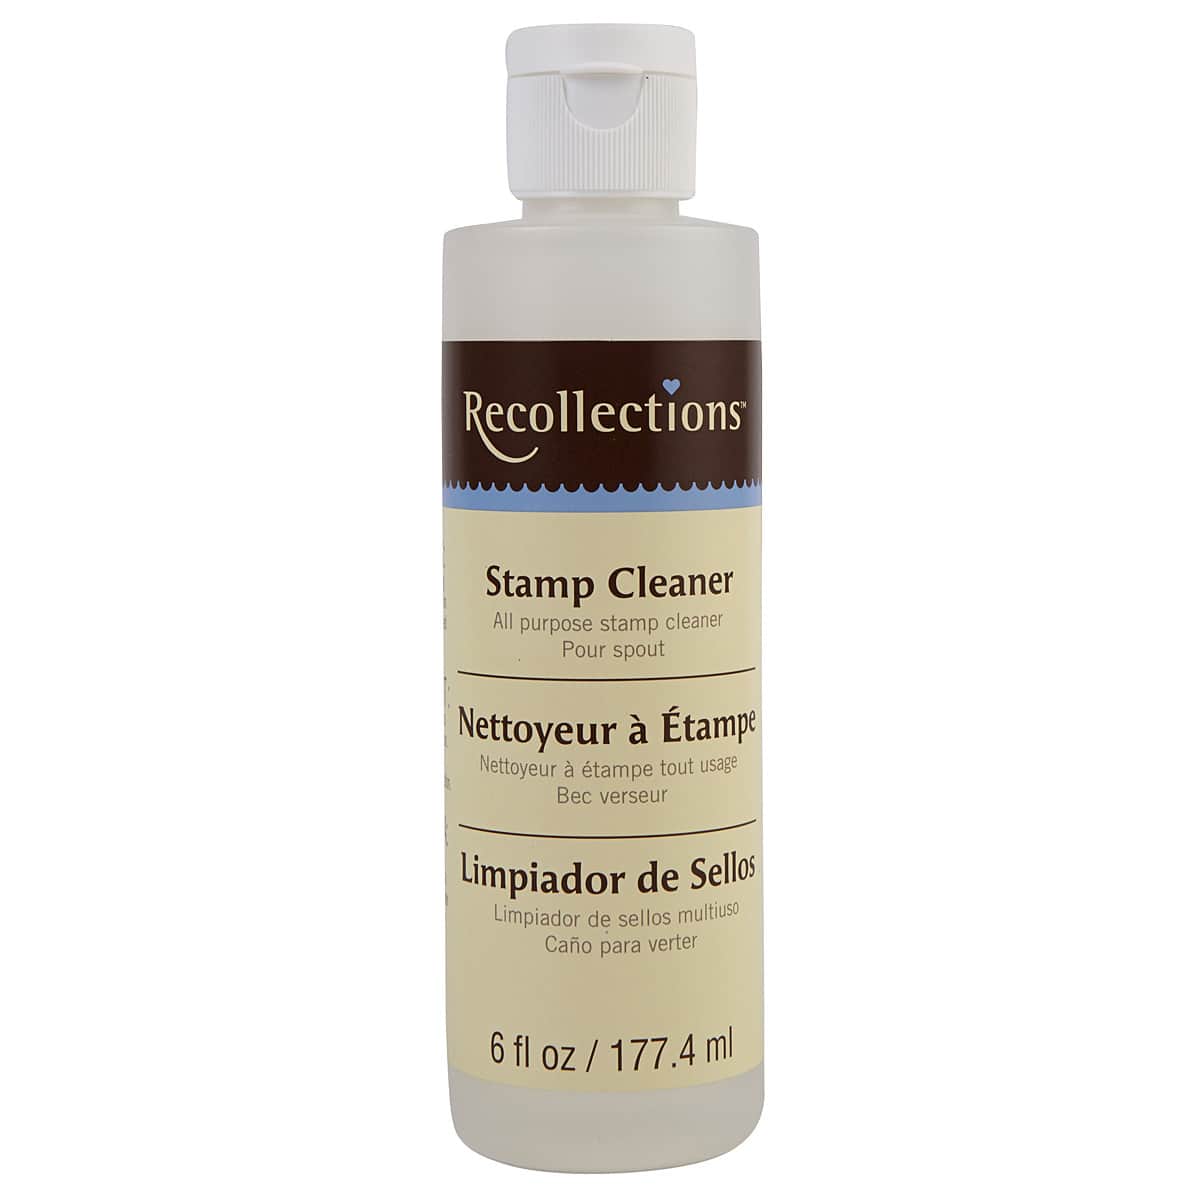 Recollections™ Stamp Cleaner